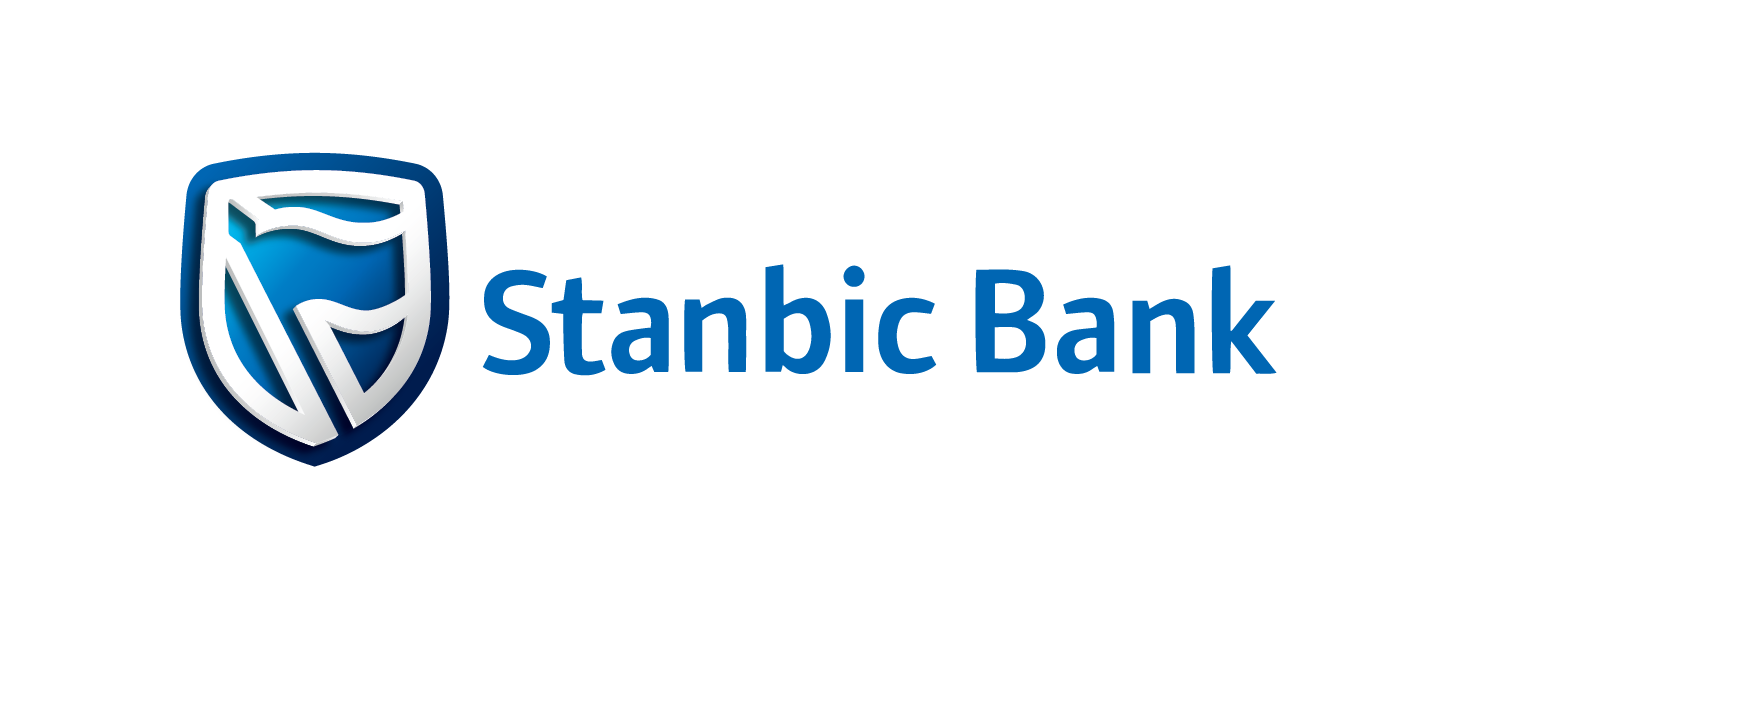 Just In: Stanbic Bank Loses Million Of Dollars Through Cybercrime. 49